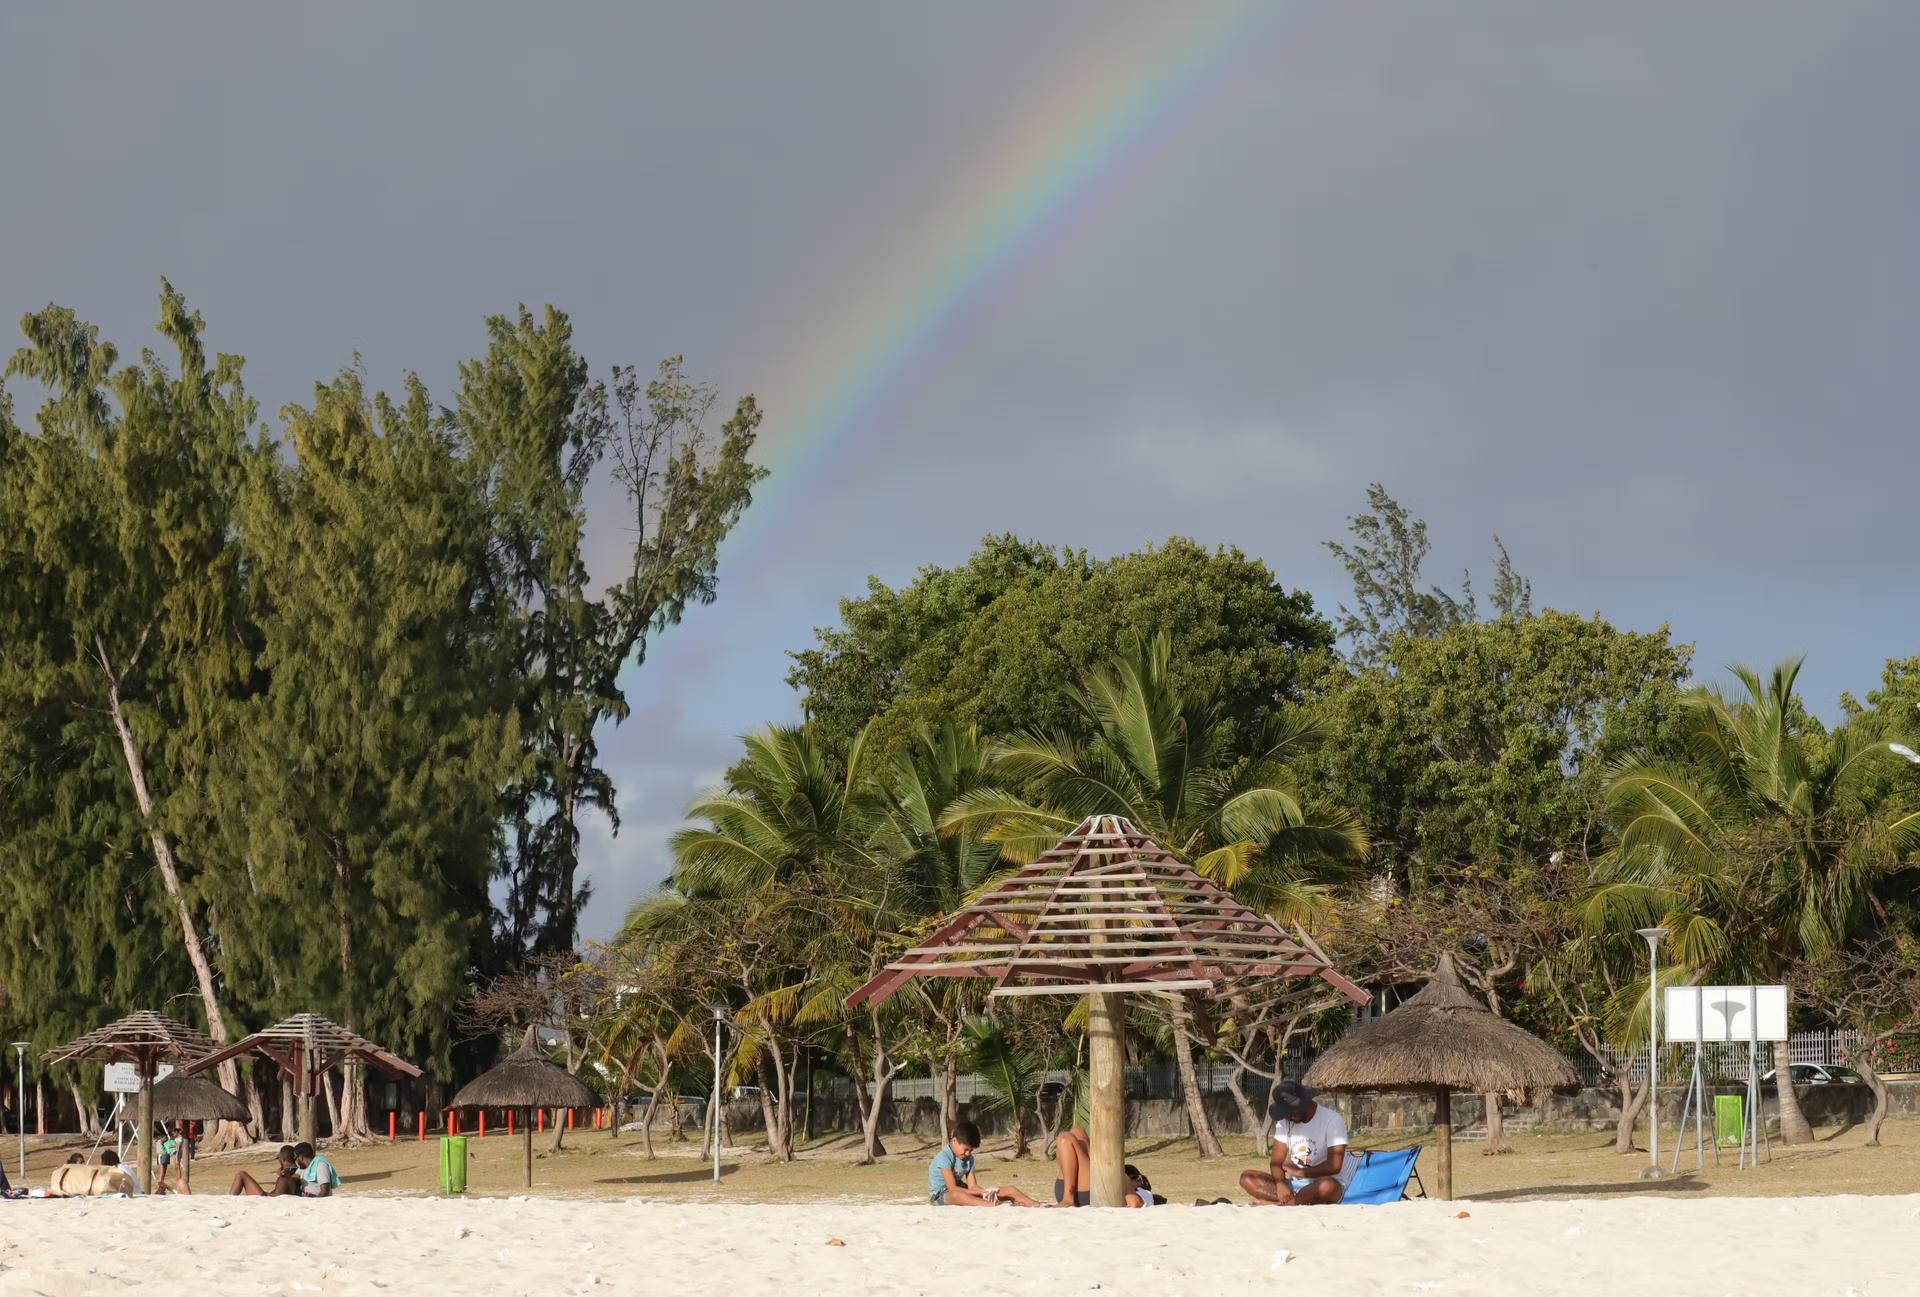 People relax in the shade of a wooden umbrella on the beach with a rainbow streaking across the sky behind them 